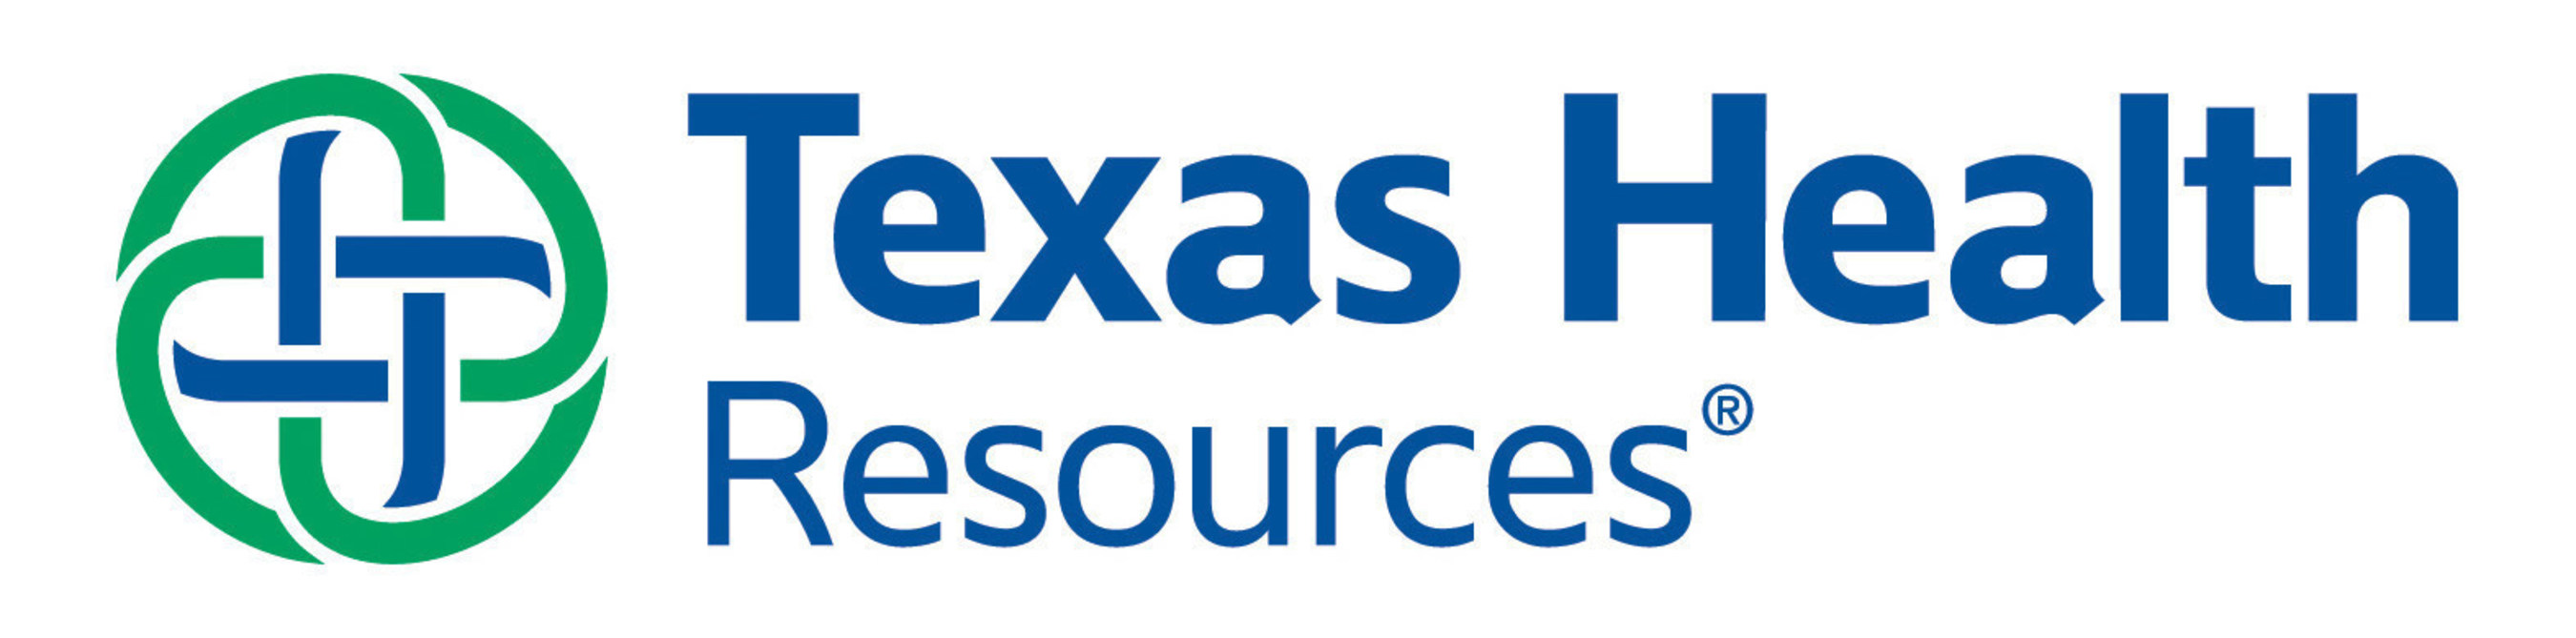 Texas Health Resources and Adeptus Health Join Forces